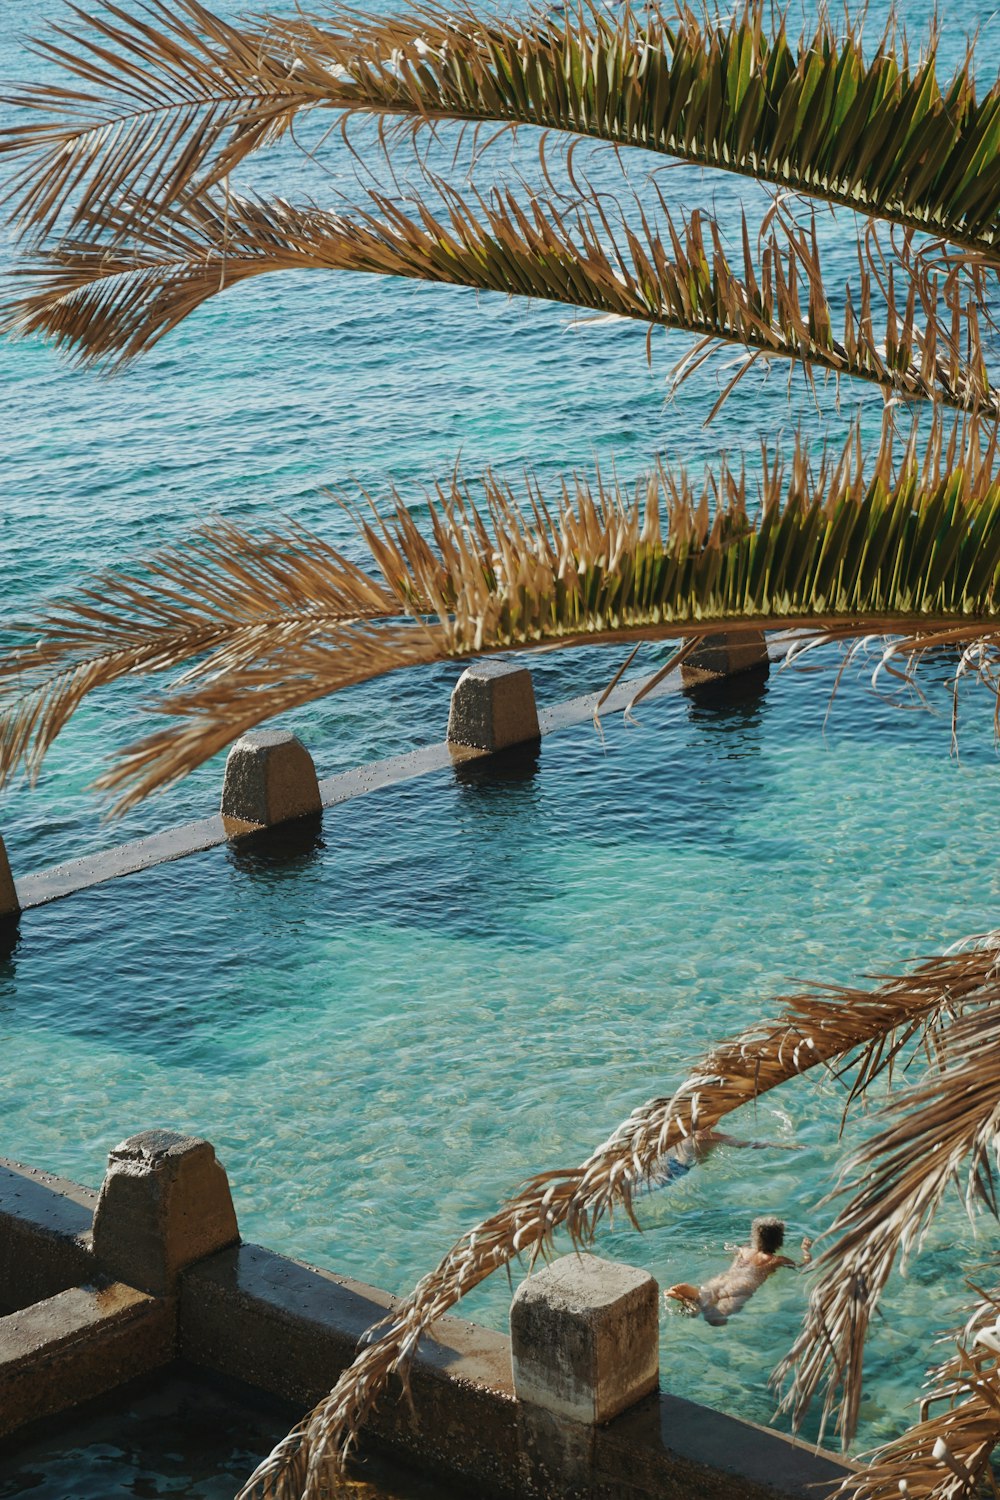 a large body of water surrounded by rocks and palm trees